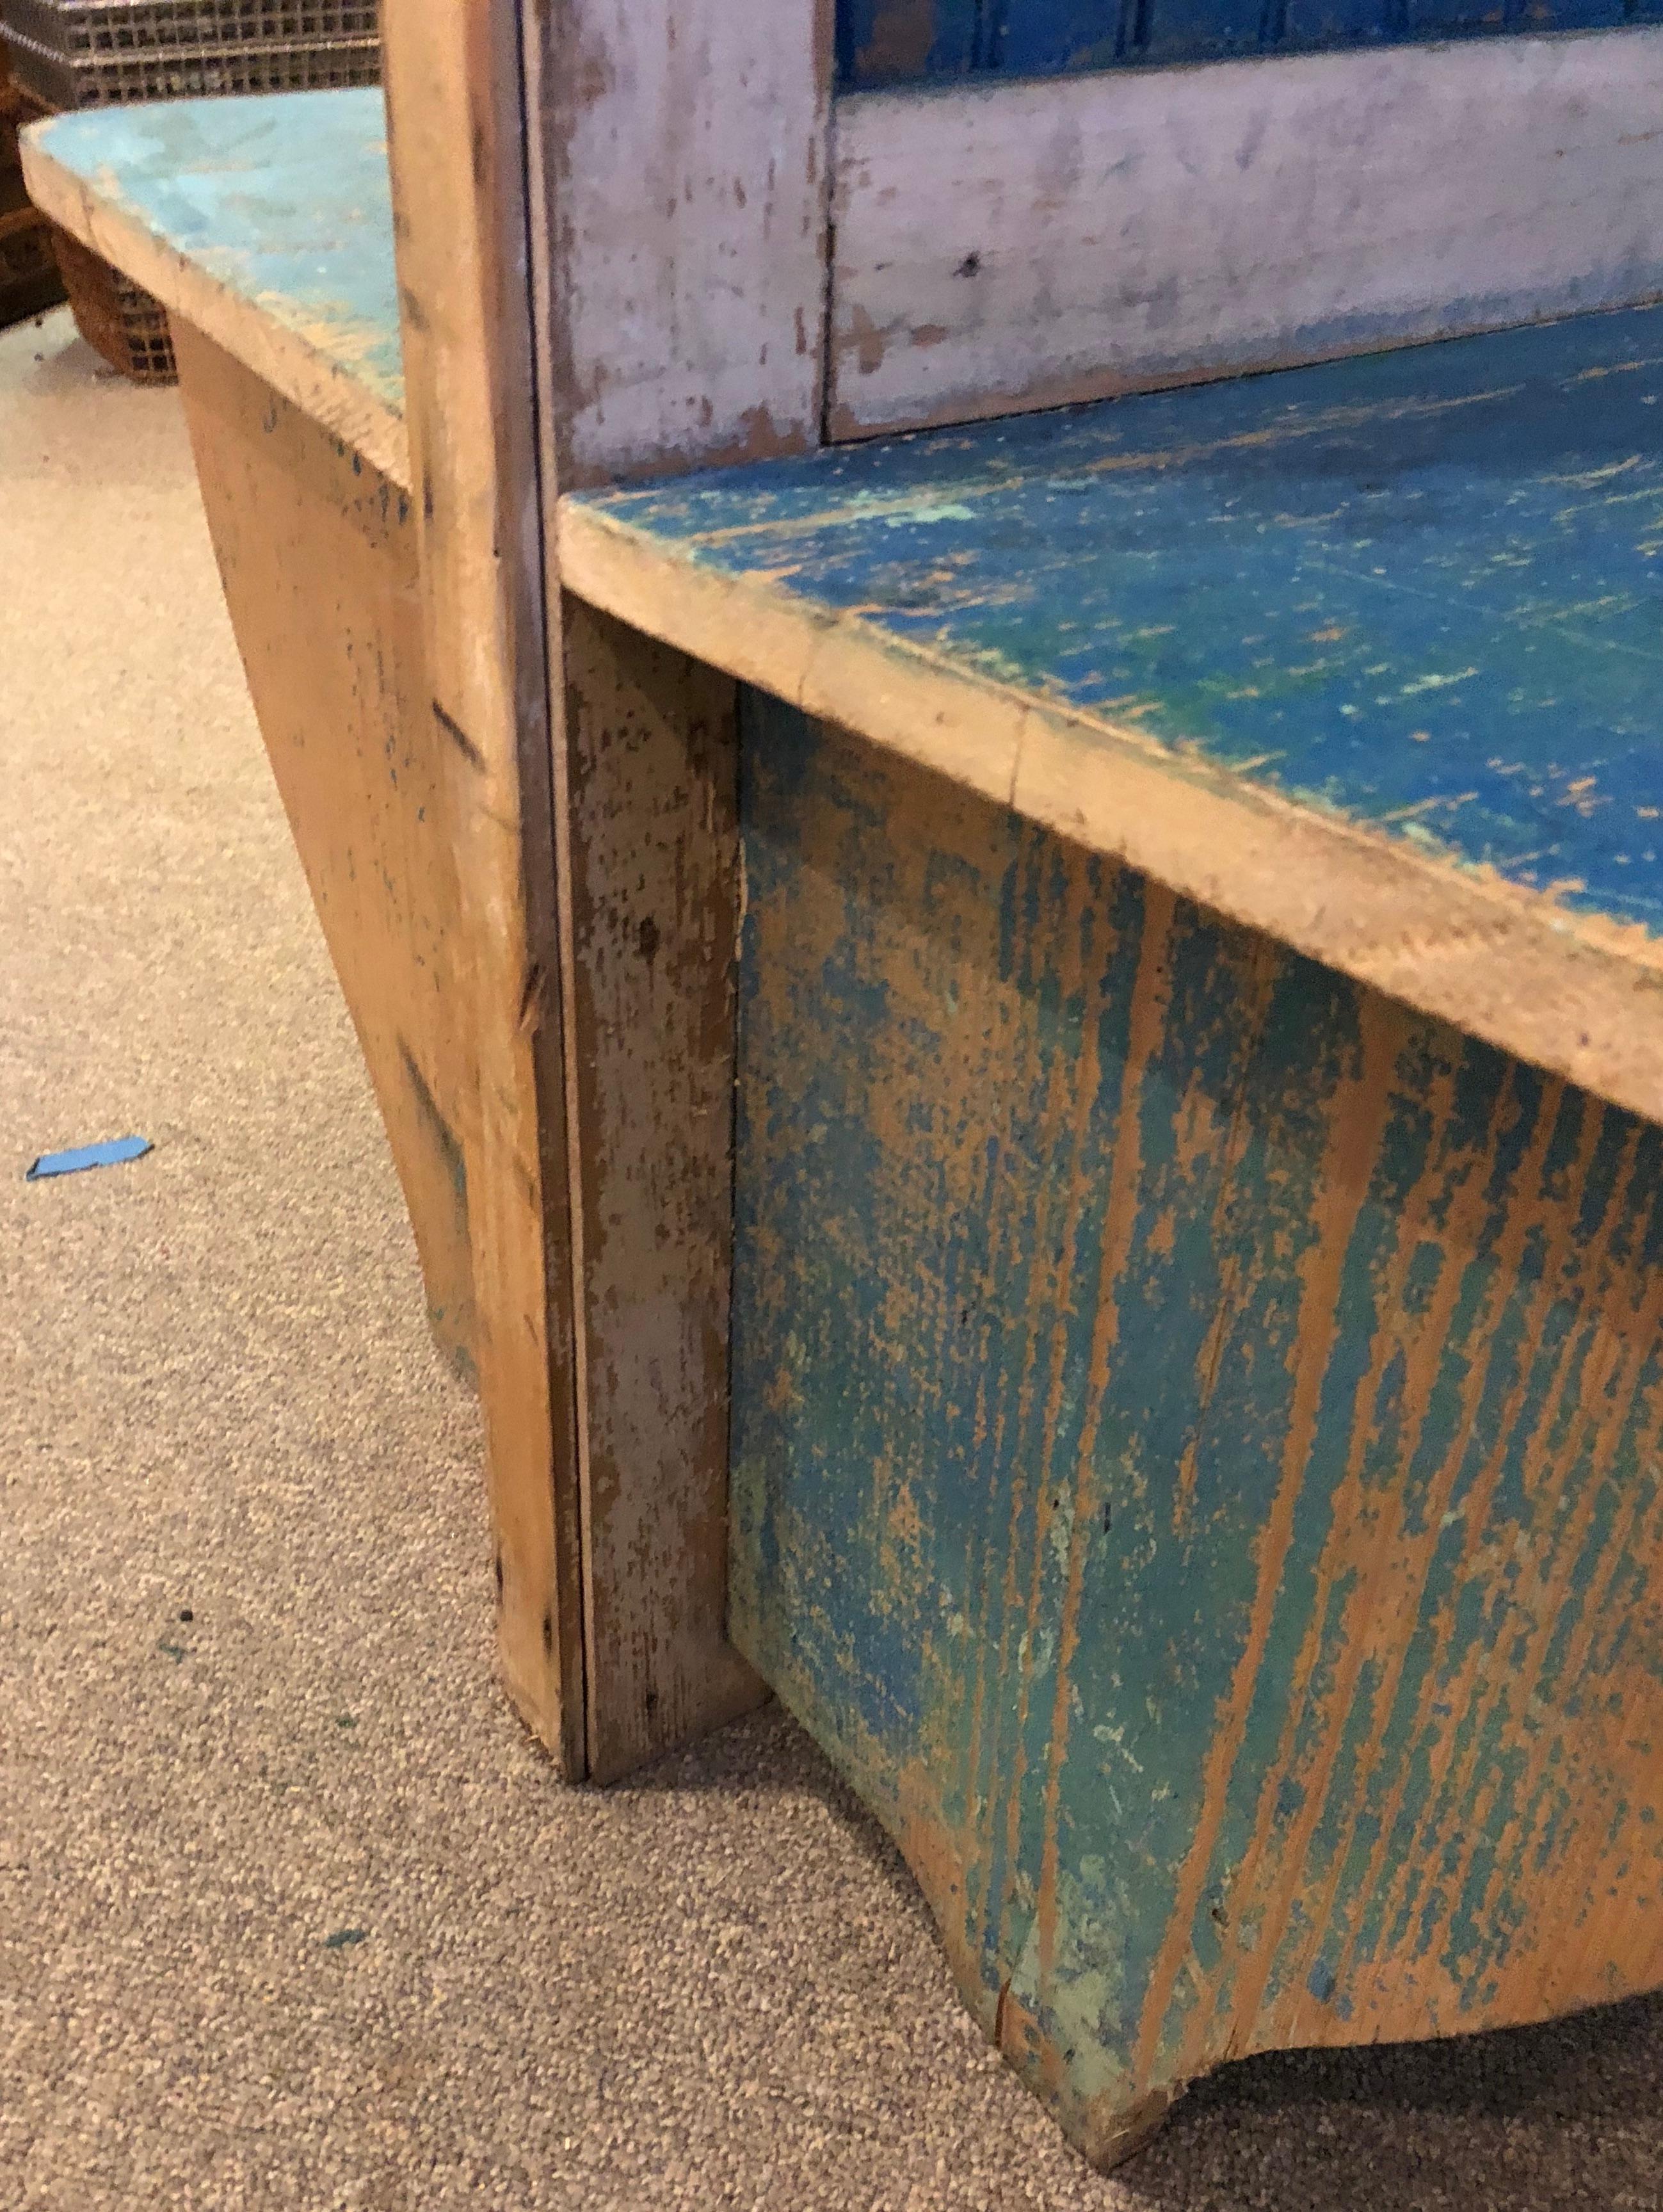 Bench from Train Depot, circa 1900s, 2 Sided with Original Blue Paint (20. Jahrhundert)